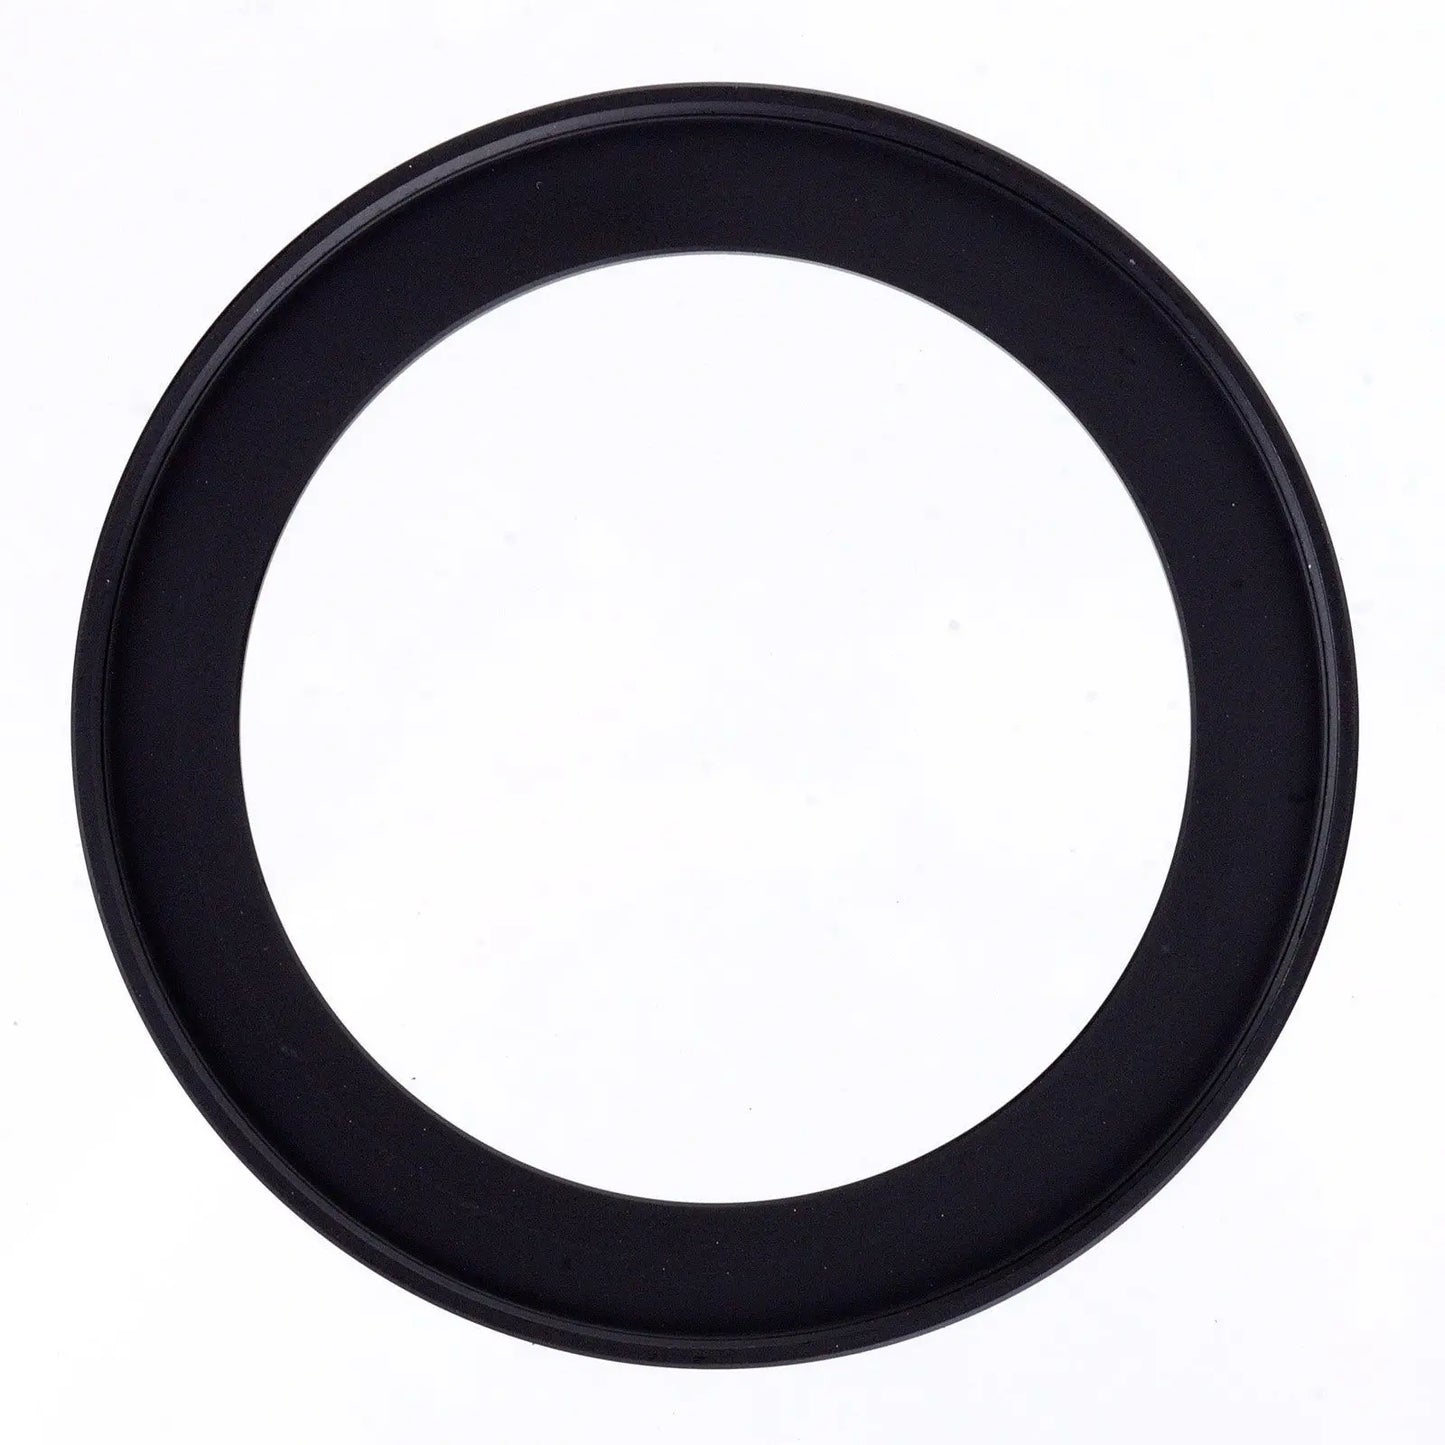 58mm-72mm Step Up Ring - REALM DISTRIBUTION